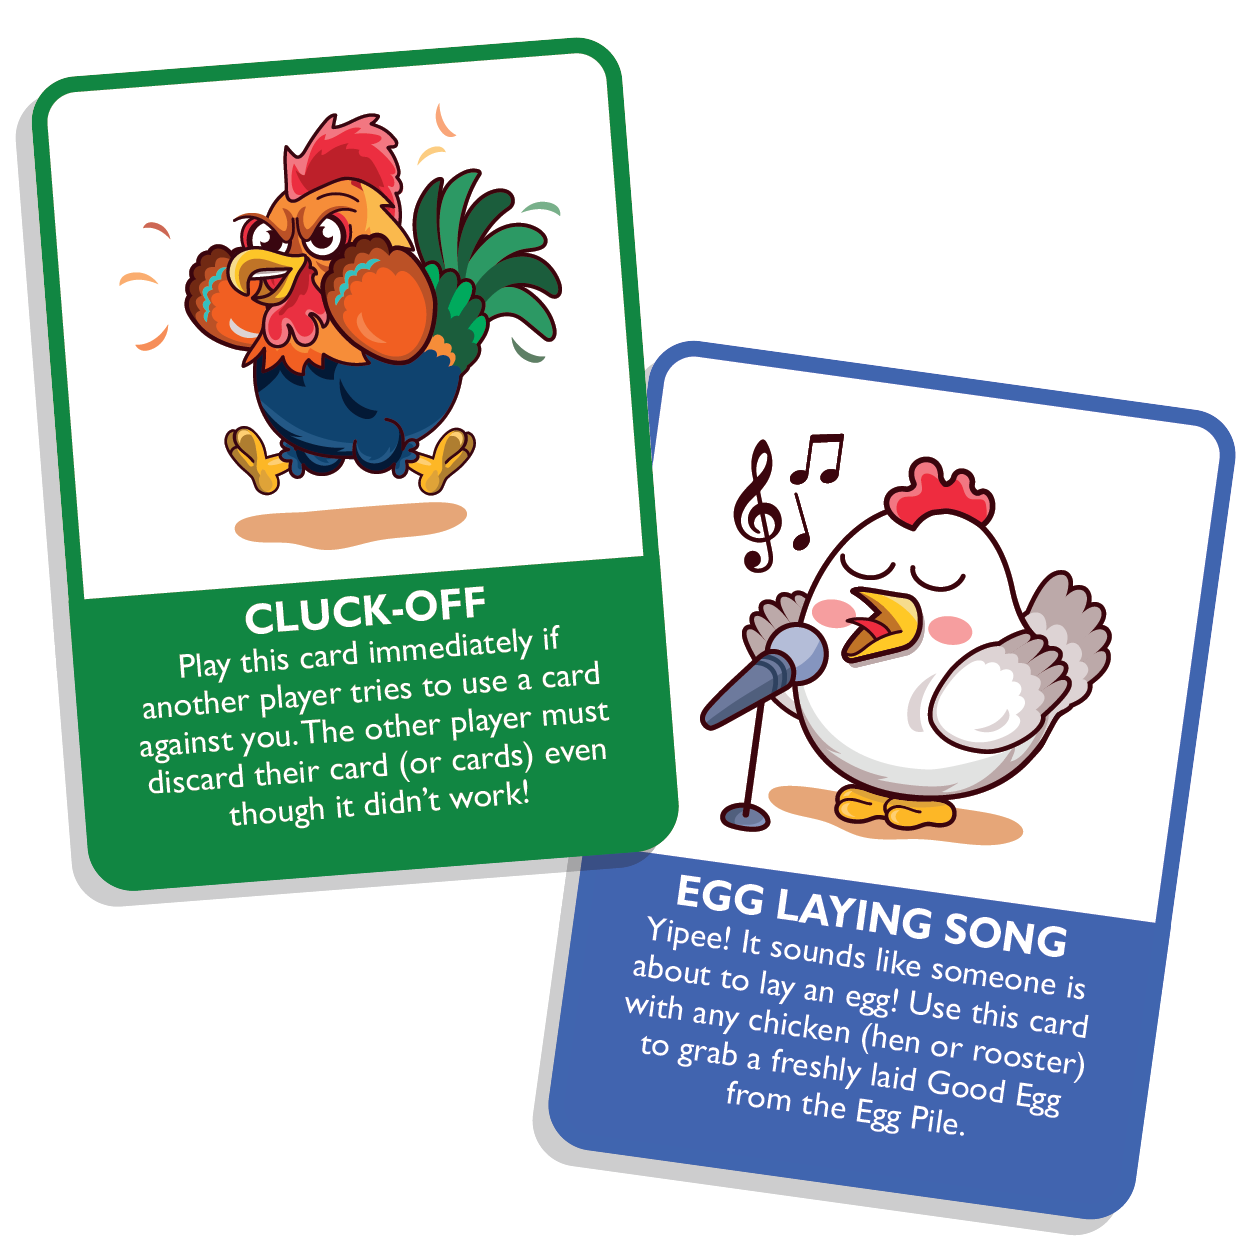 Egg Bound: The Hilarious Chicken Card Game